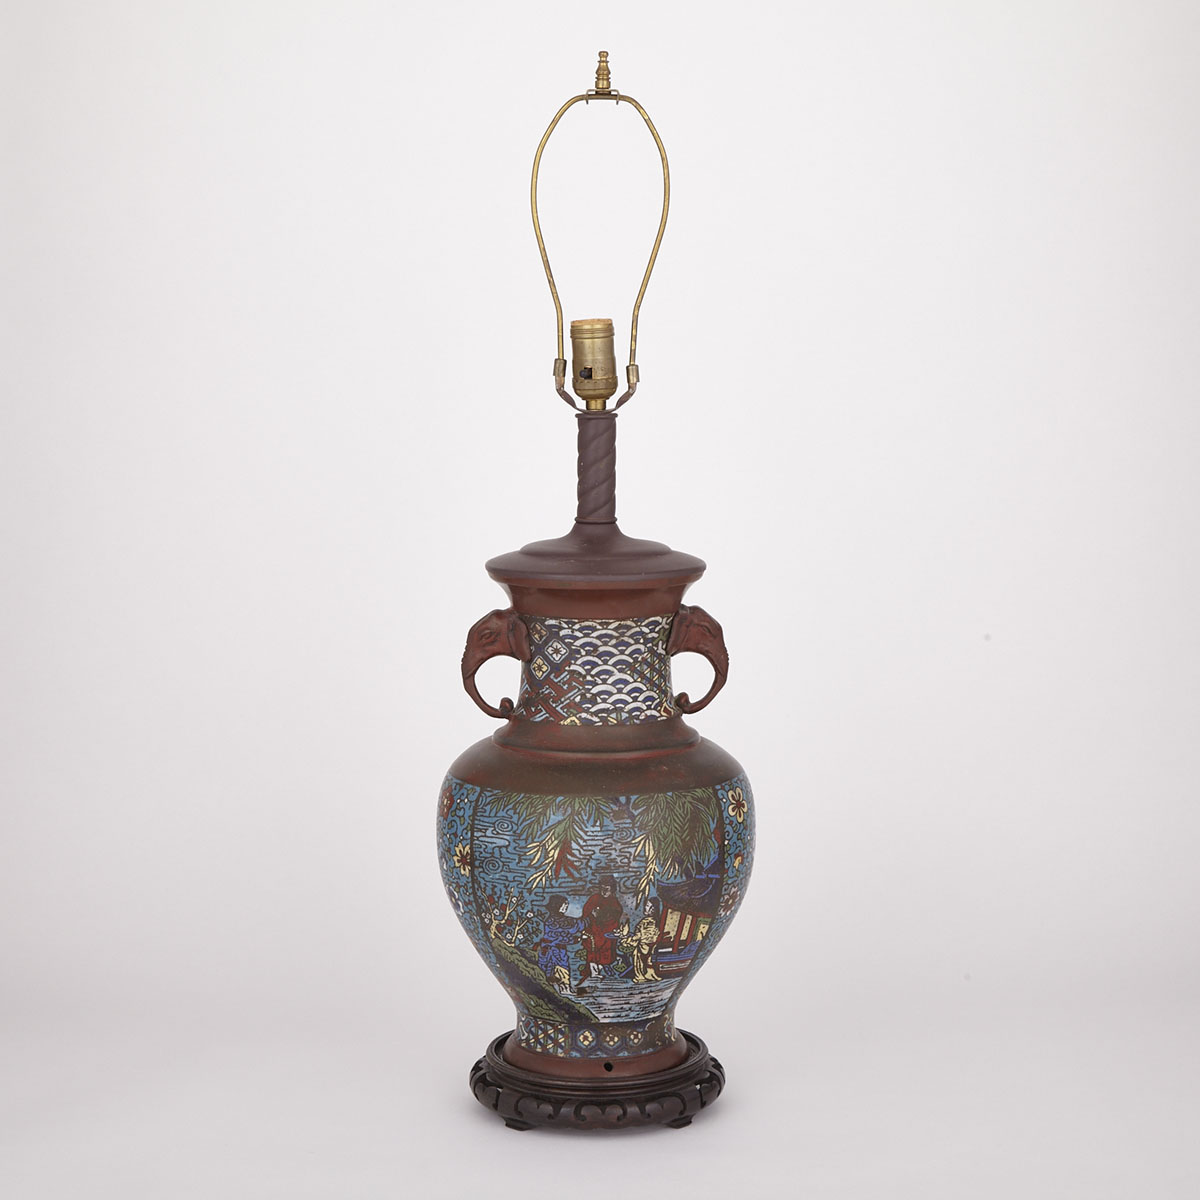 Japanese Champleve Vase Lamp, early 20th Century